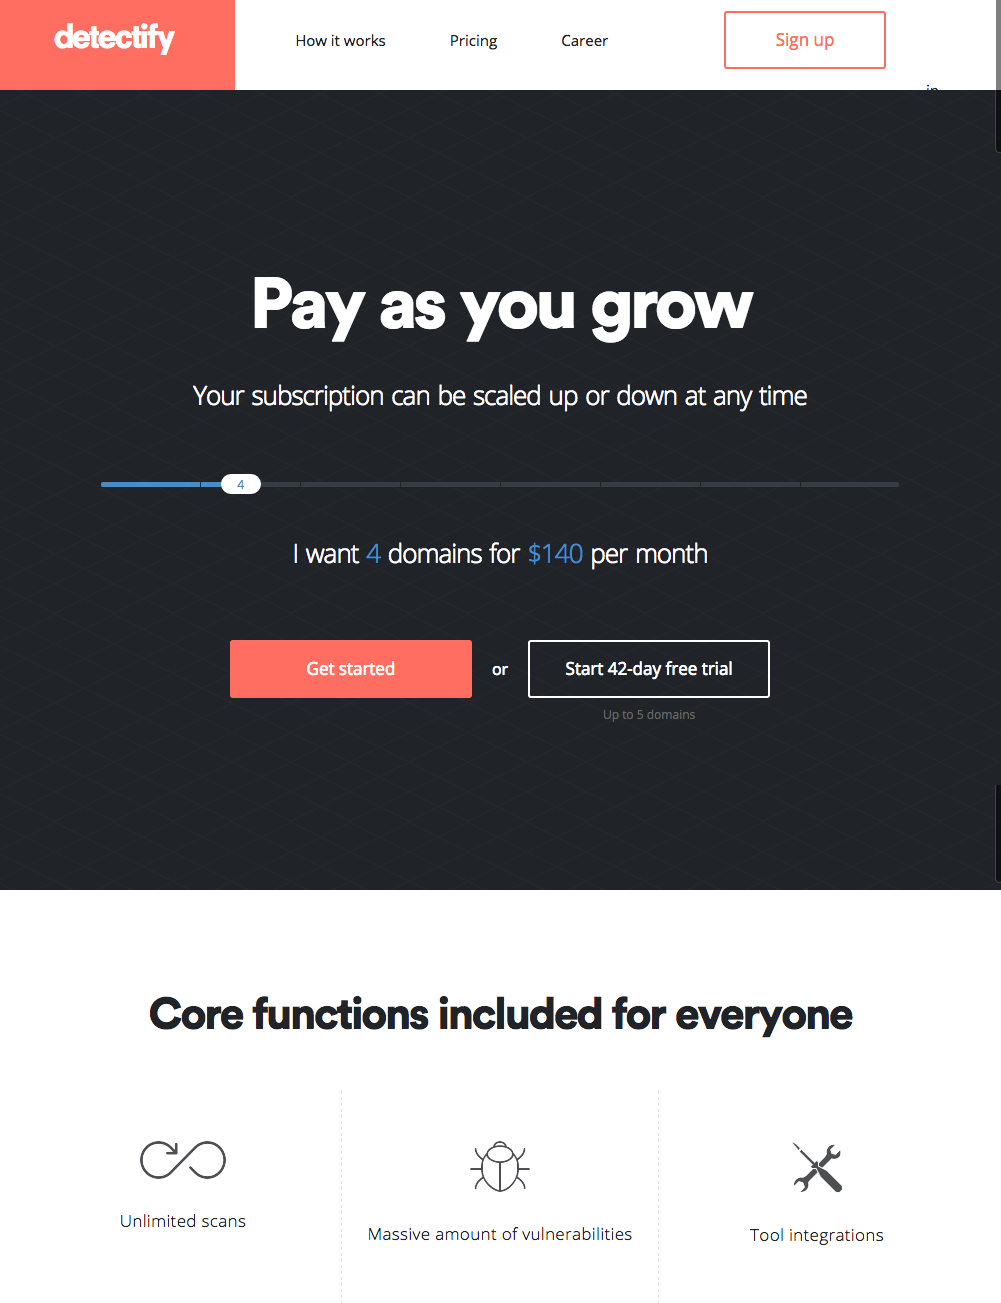 detectify-pricing-page.png